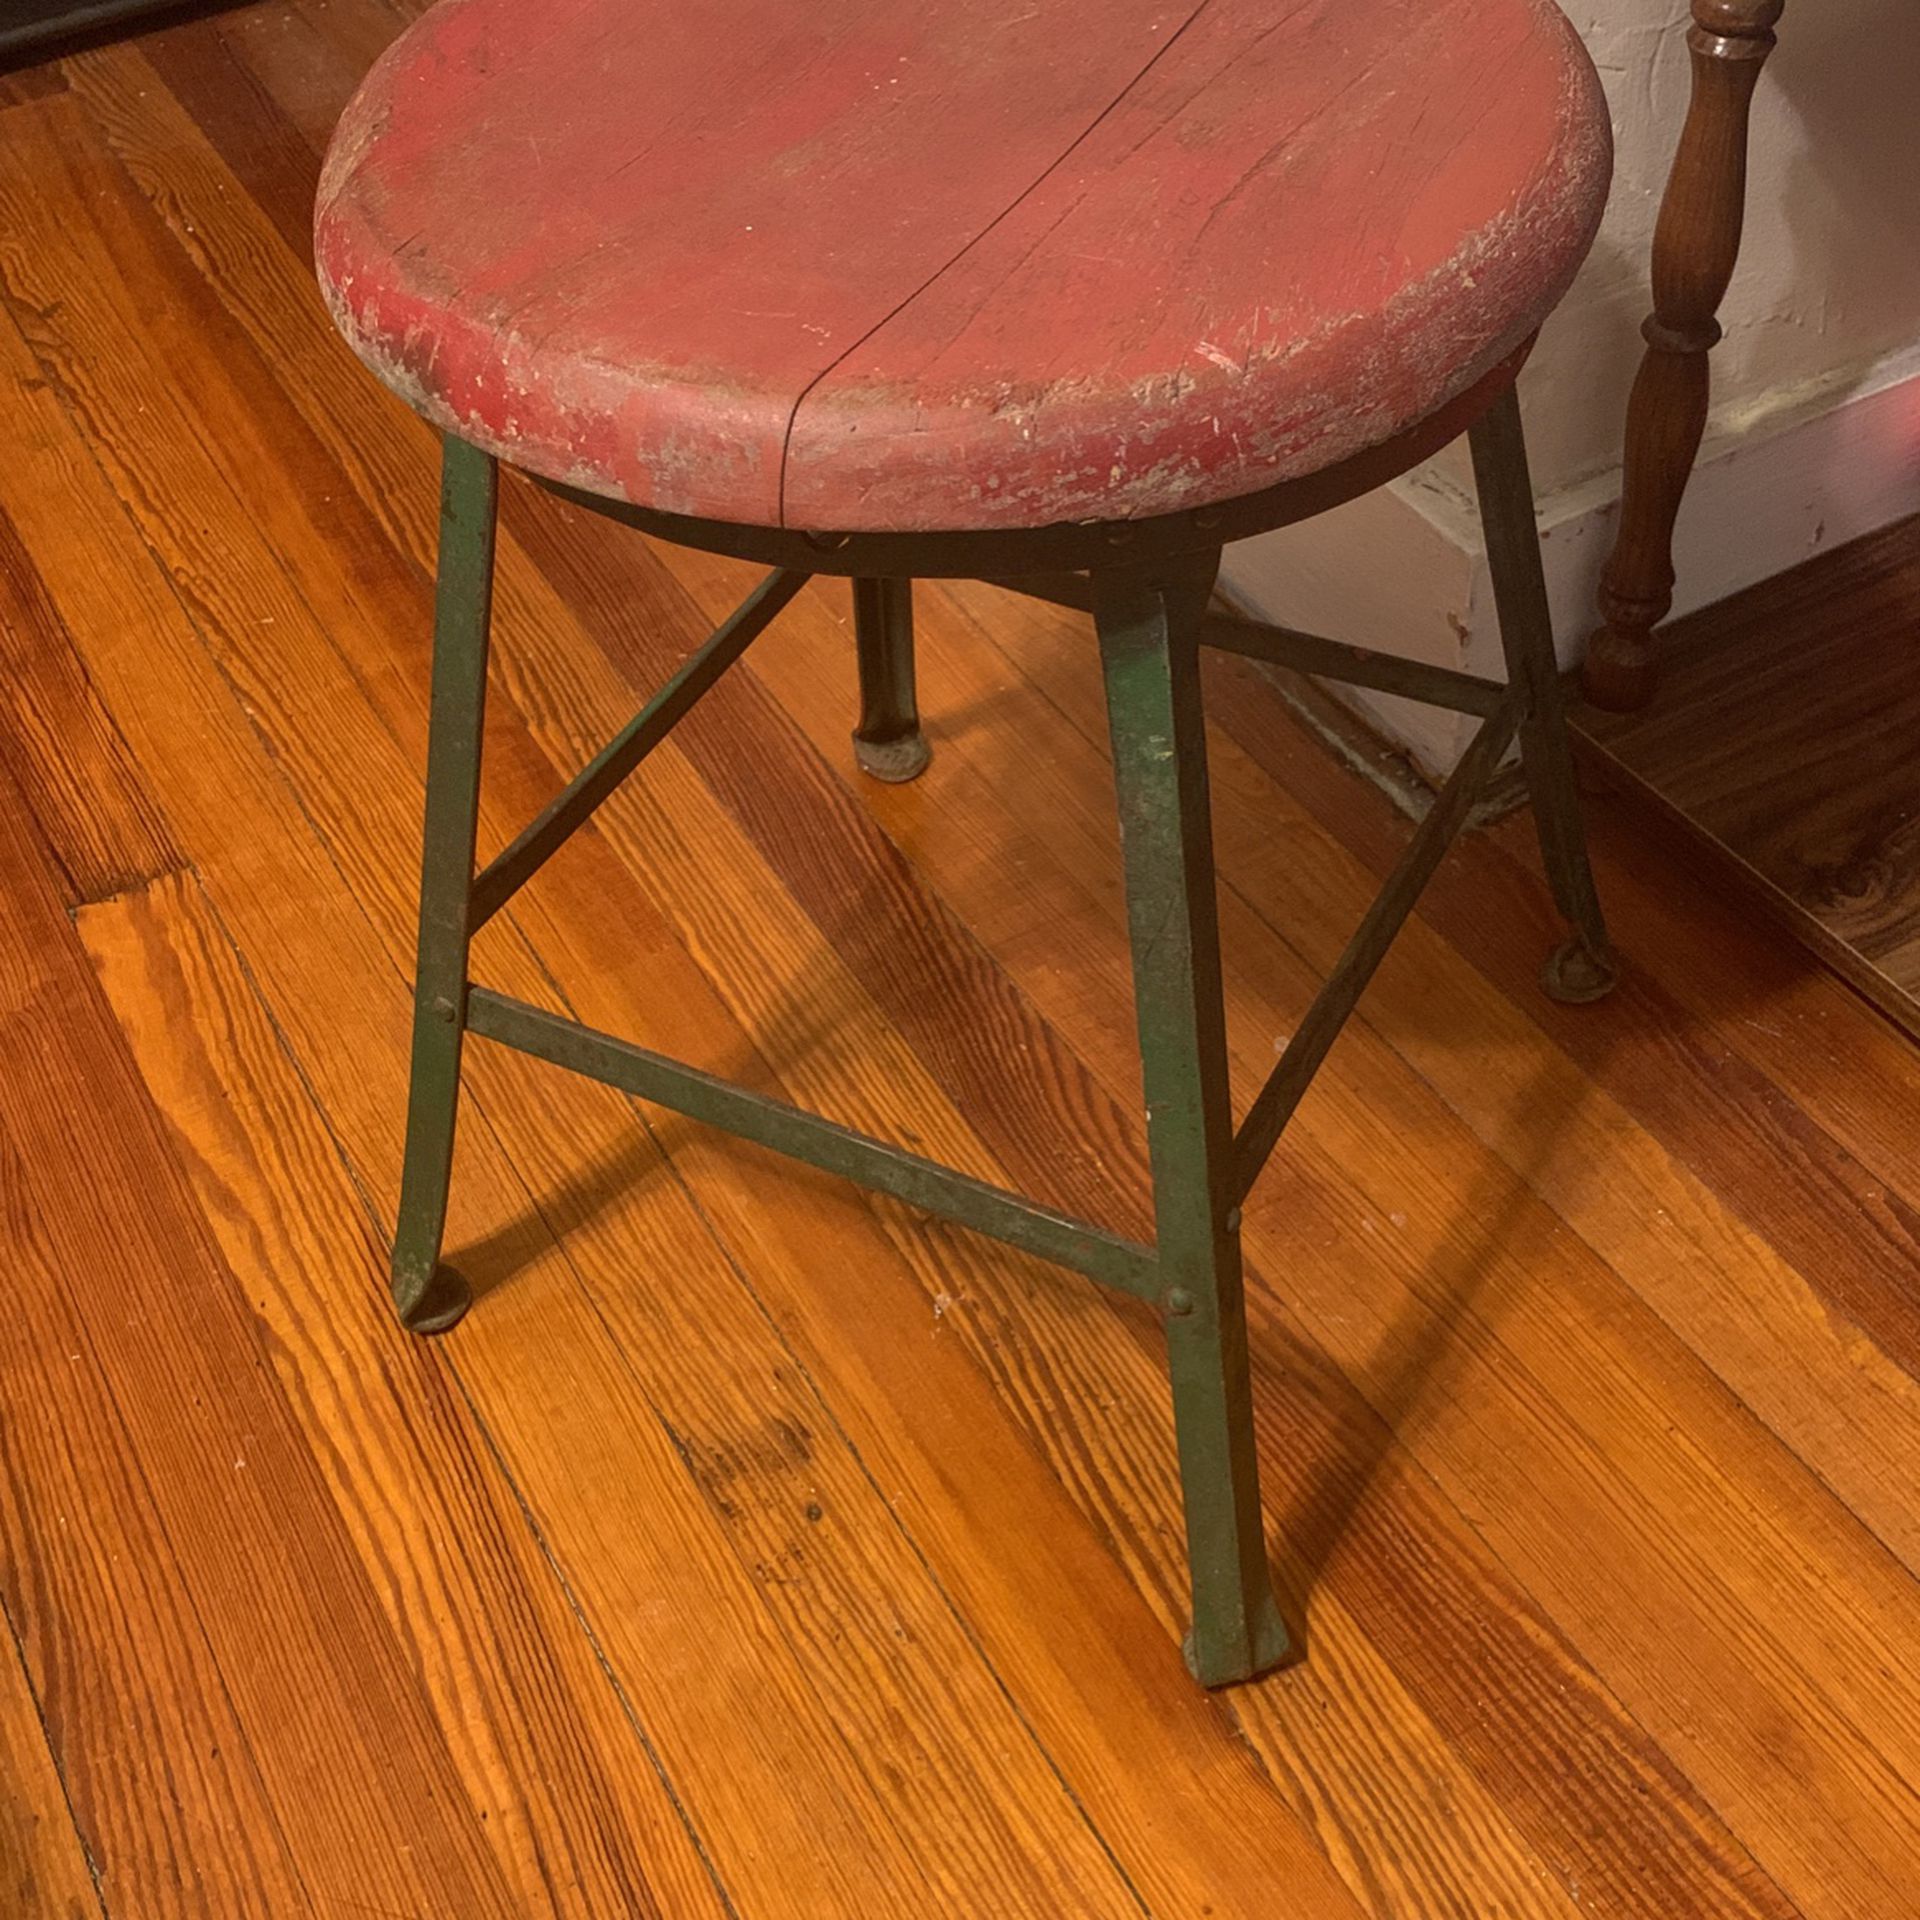 Very  Old Stool.       65-75 Years.       JUST REDUCED 